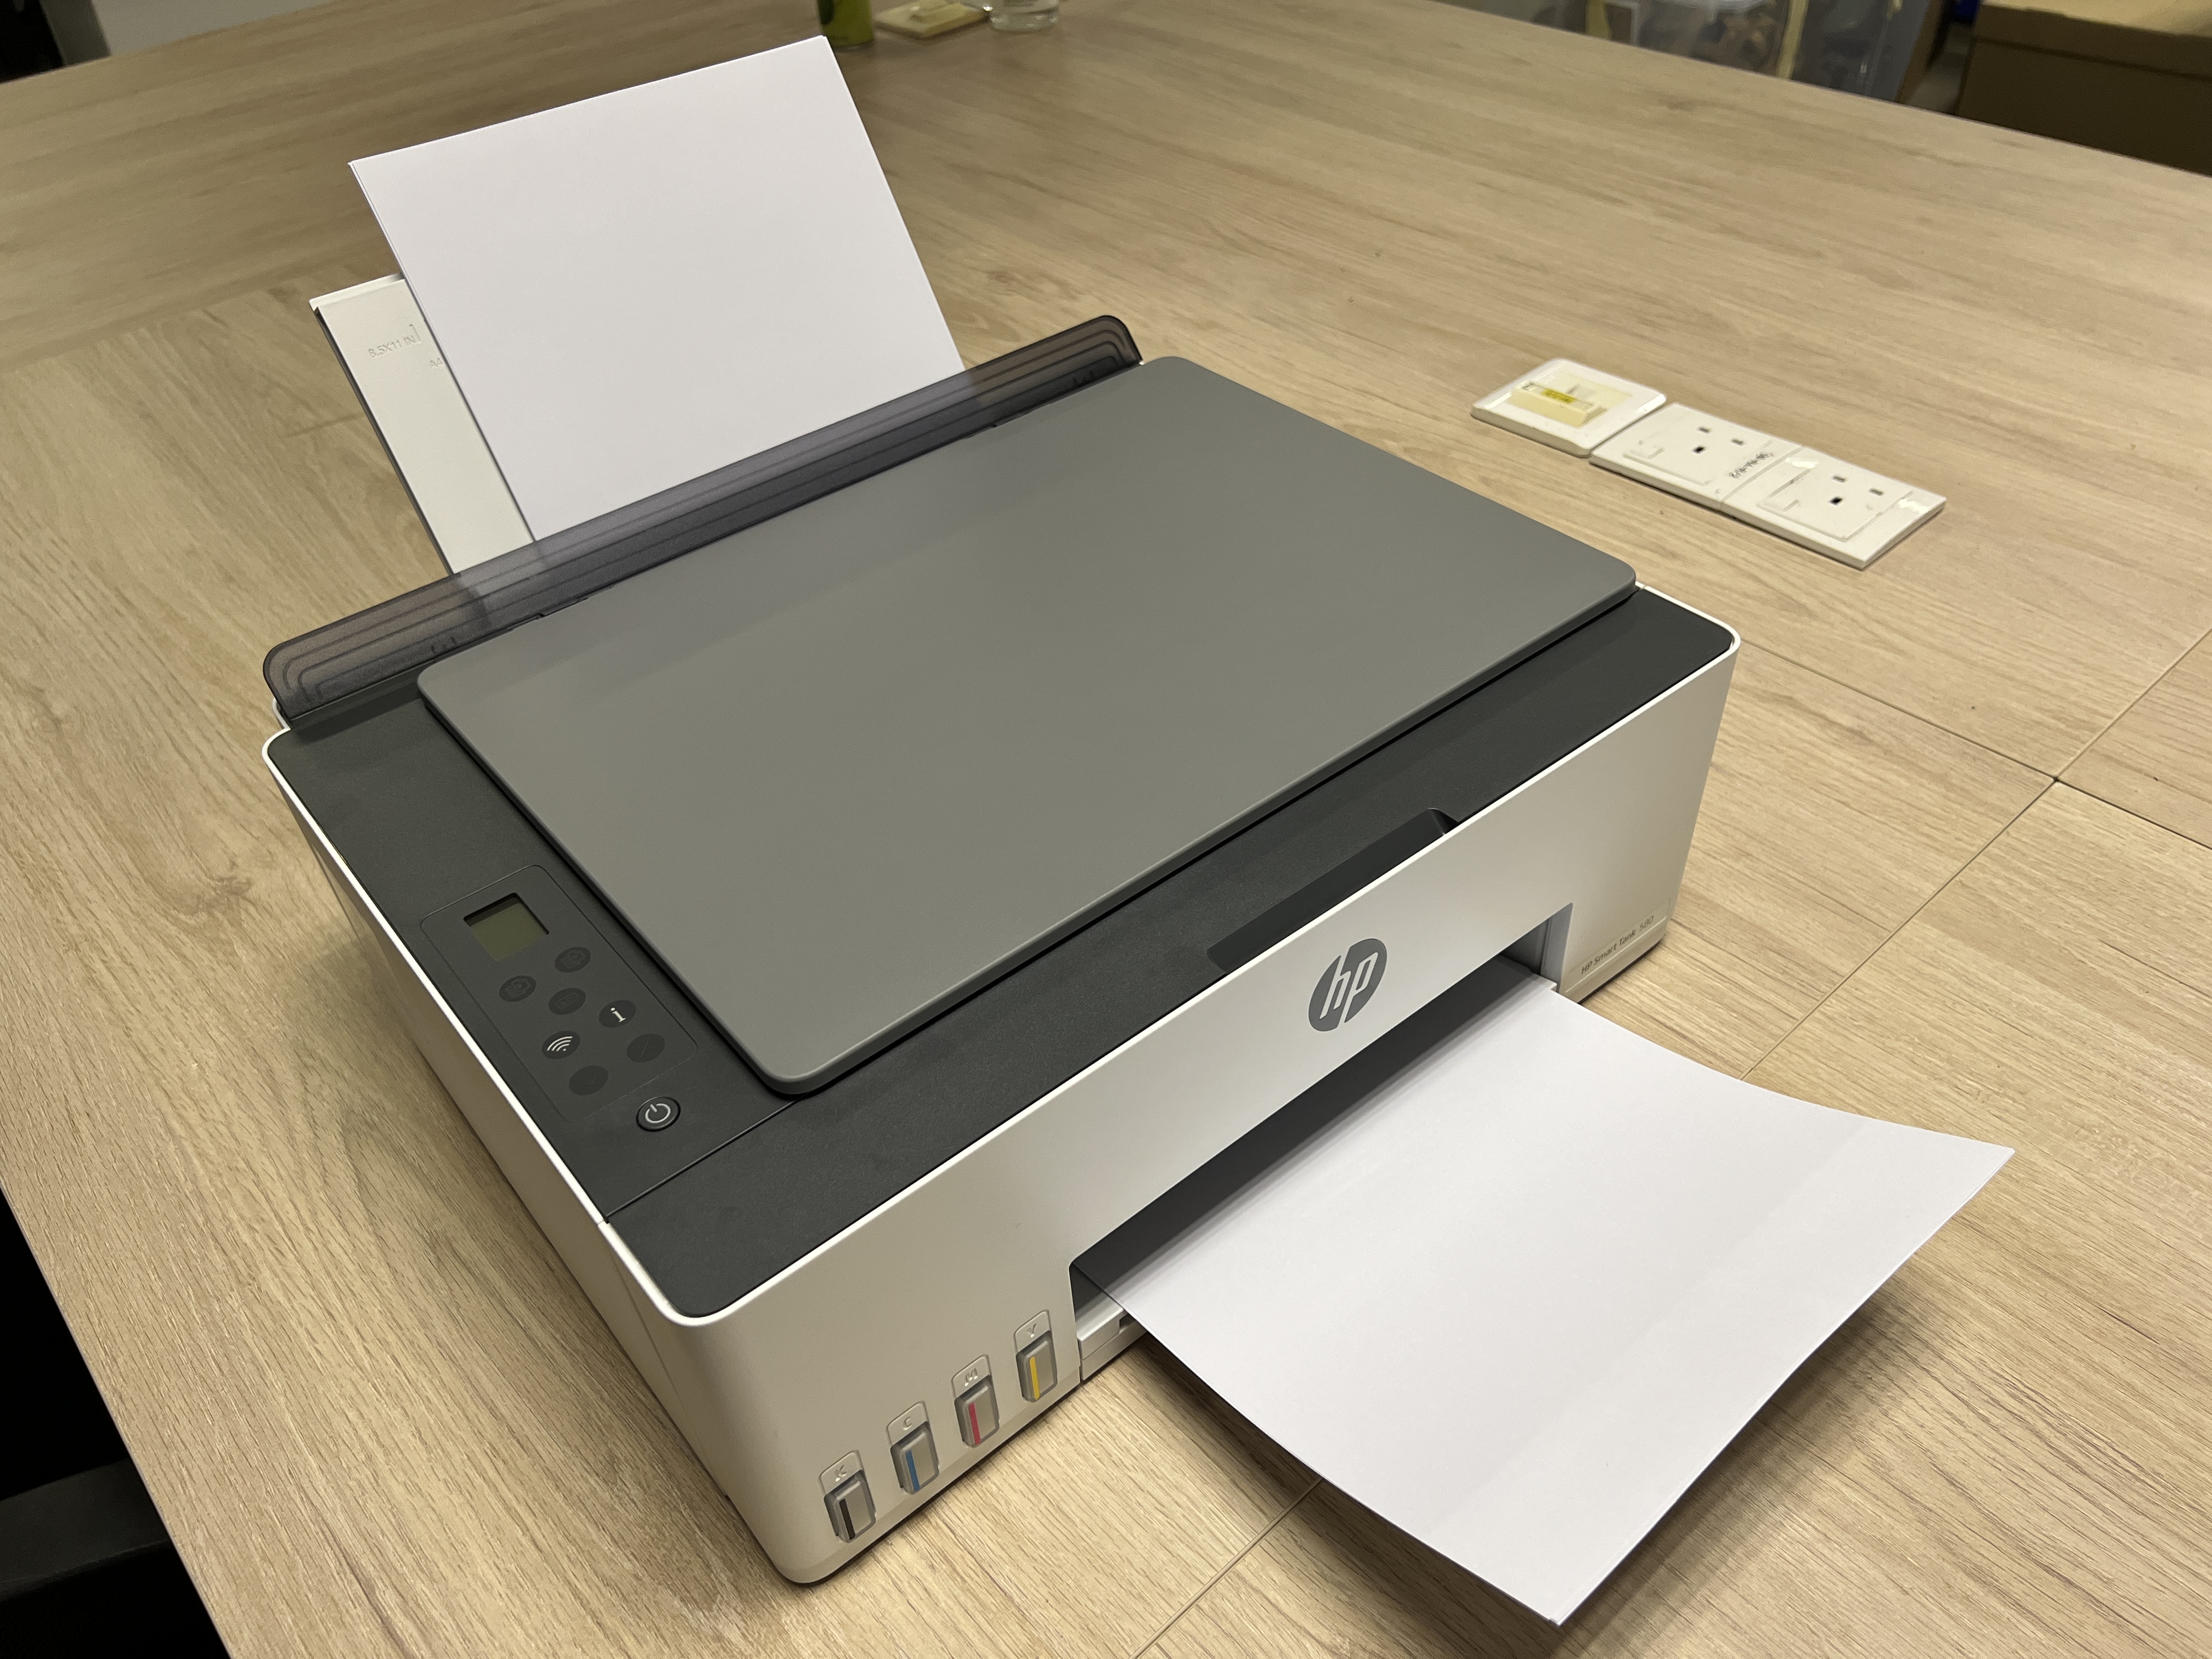 HP Smart Tank 580 Review: Printer that Prints Fast and Looks Good - TechPP